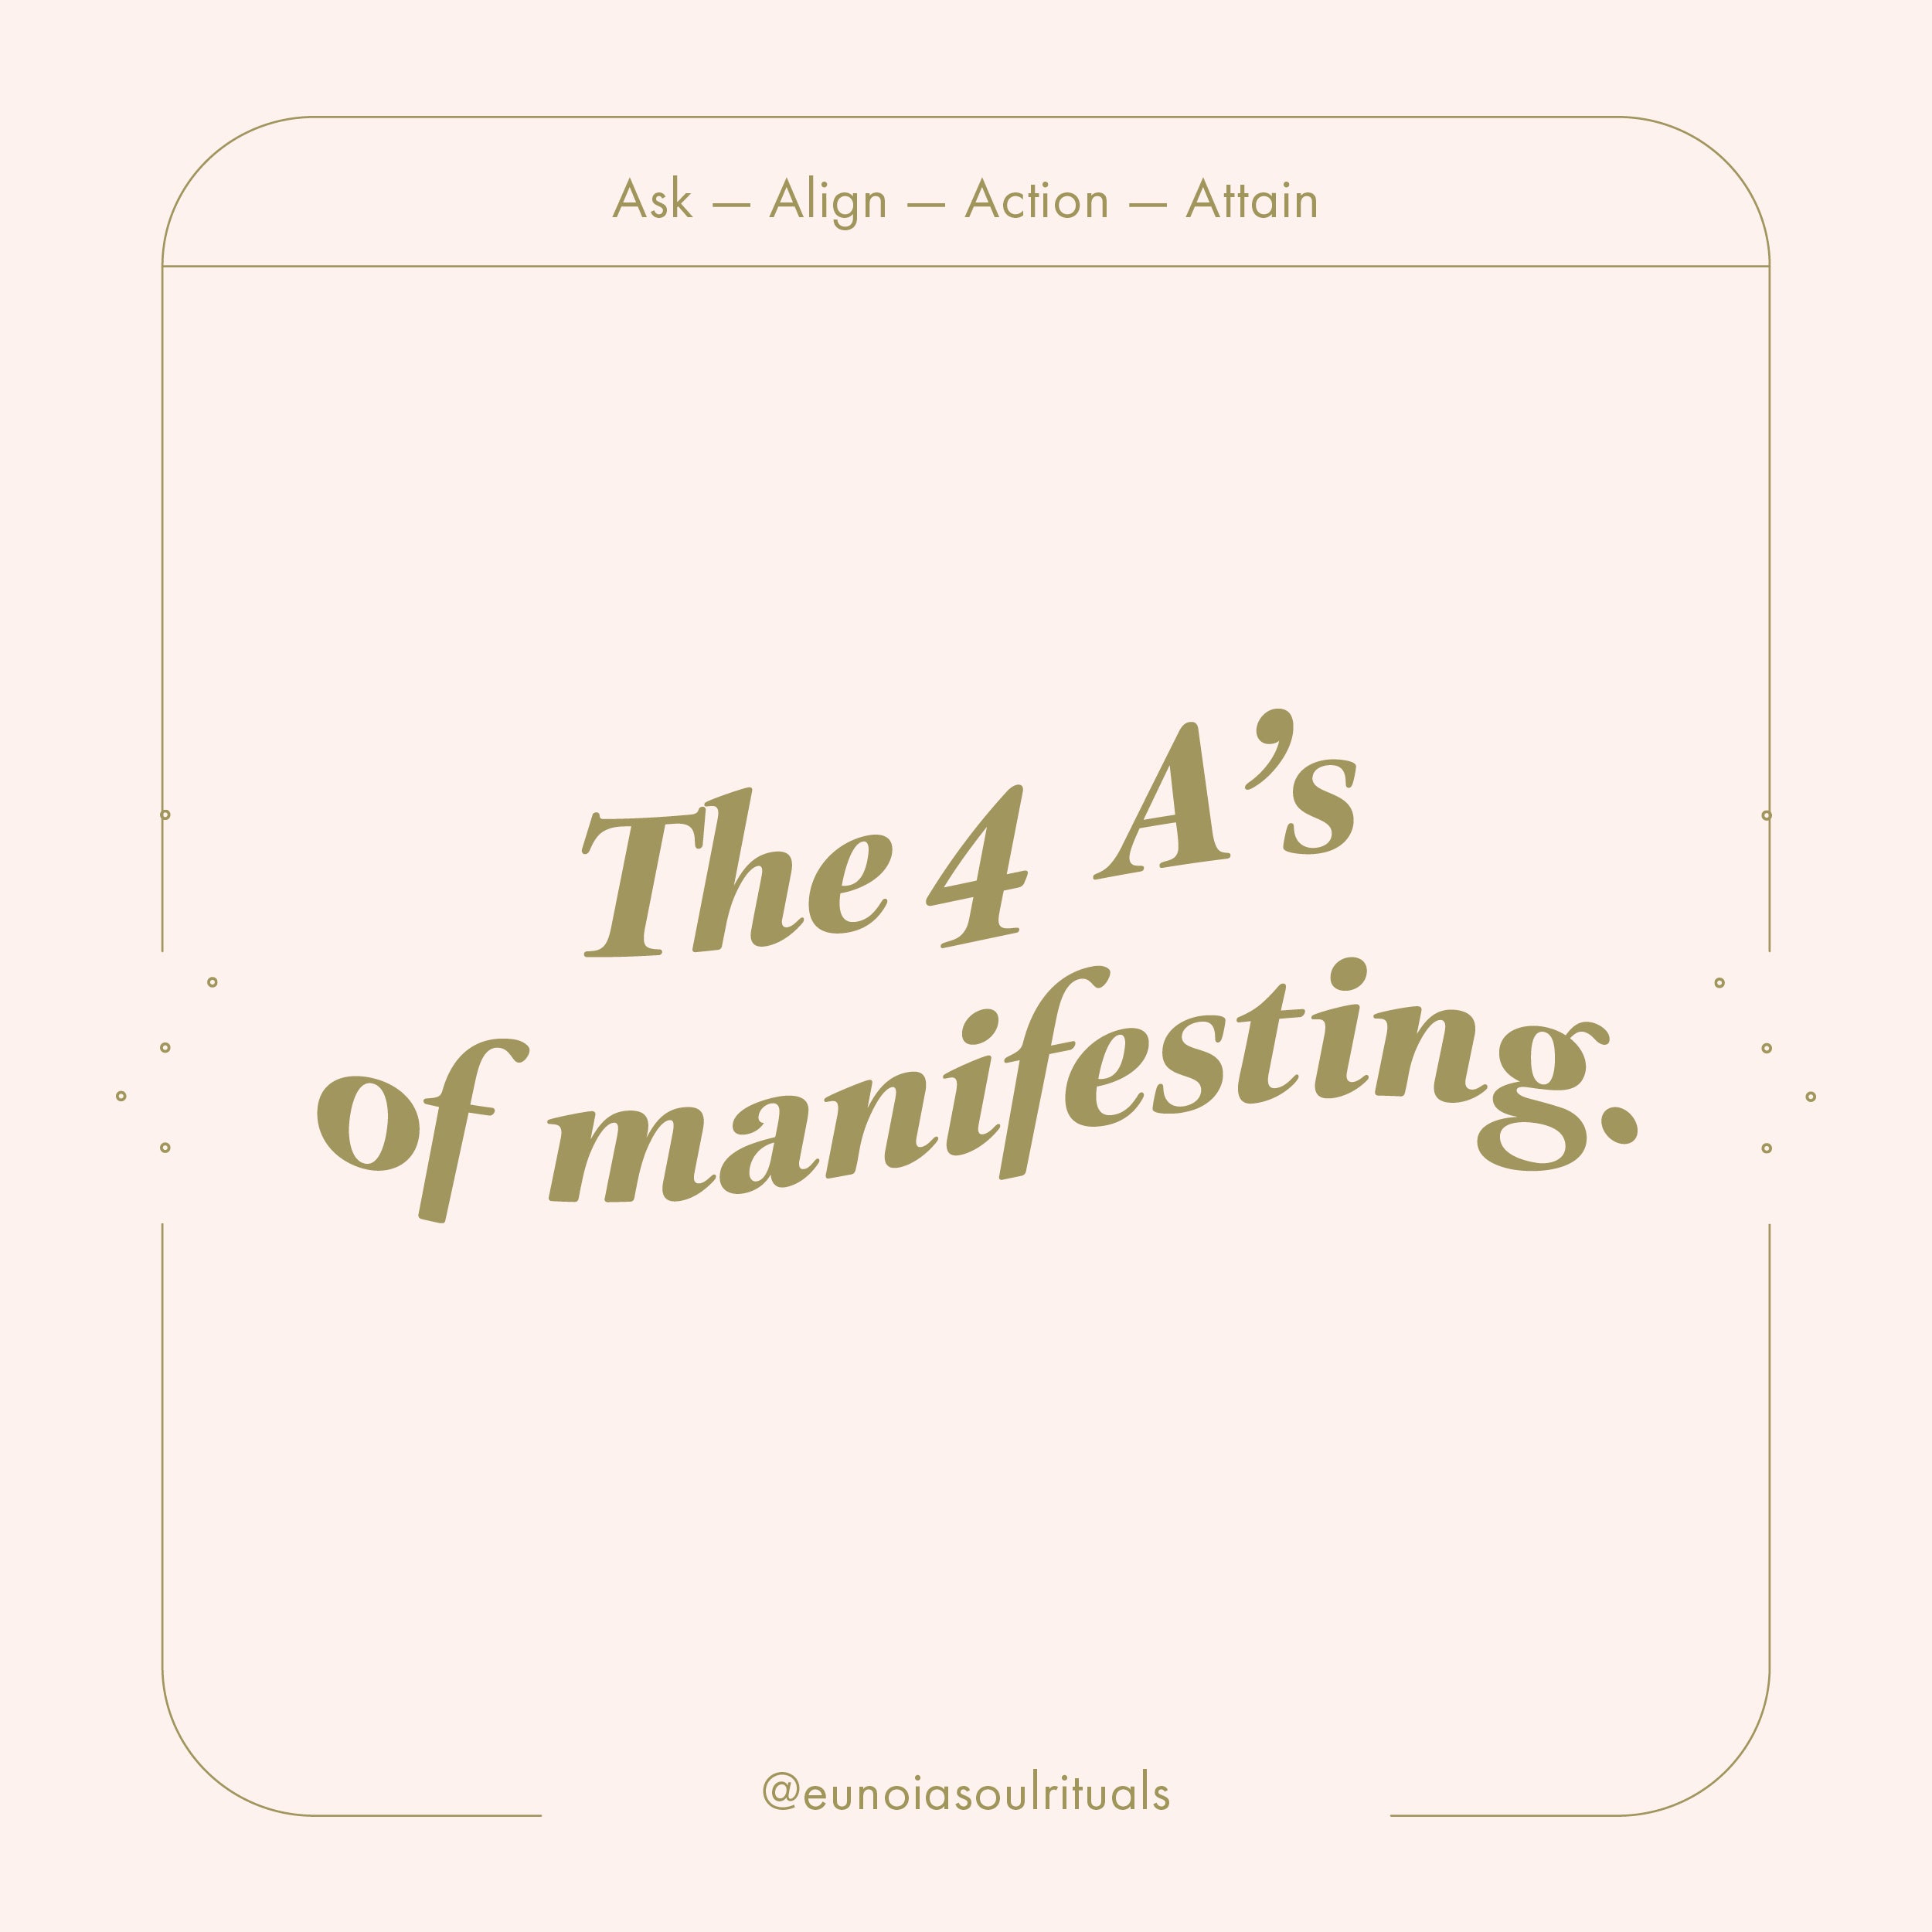 The 4 A's of Manifesting